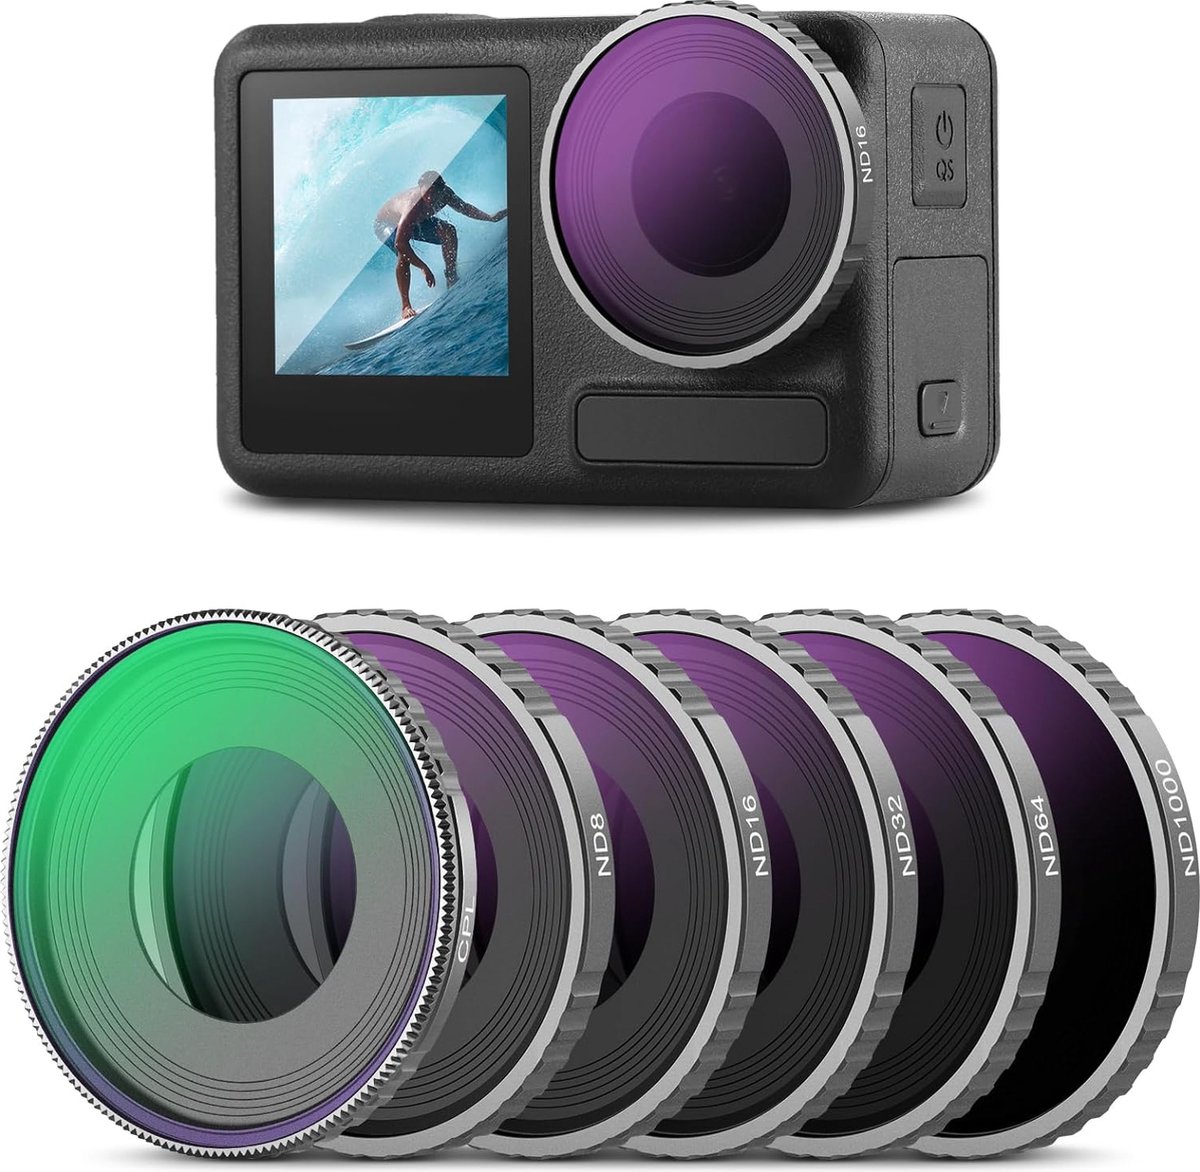 Neewer® - ND Filter Set voor DJI Osmo Action - 6-delige ND8 ND16 ND32 ND64 ND1000 CPL+ Filterkit - Neutral Density Actiecamera-accessoires - Multi-gecoate HD Optisch Glas/Aluminium Frame